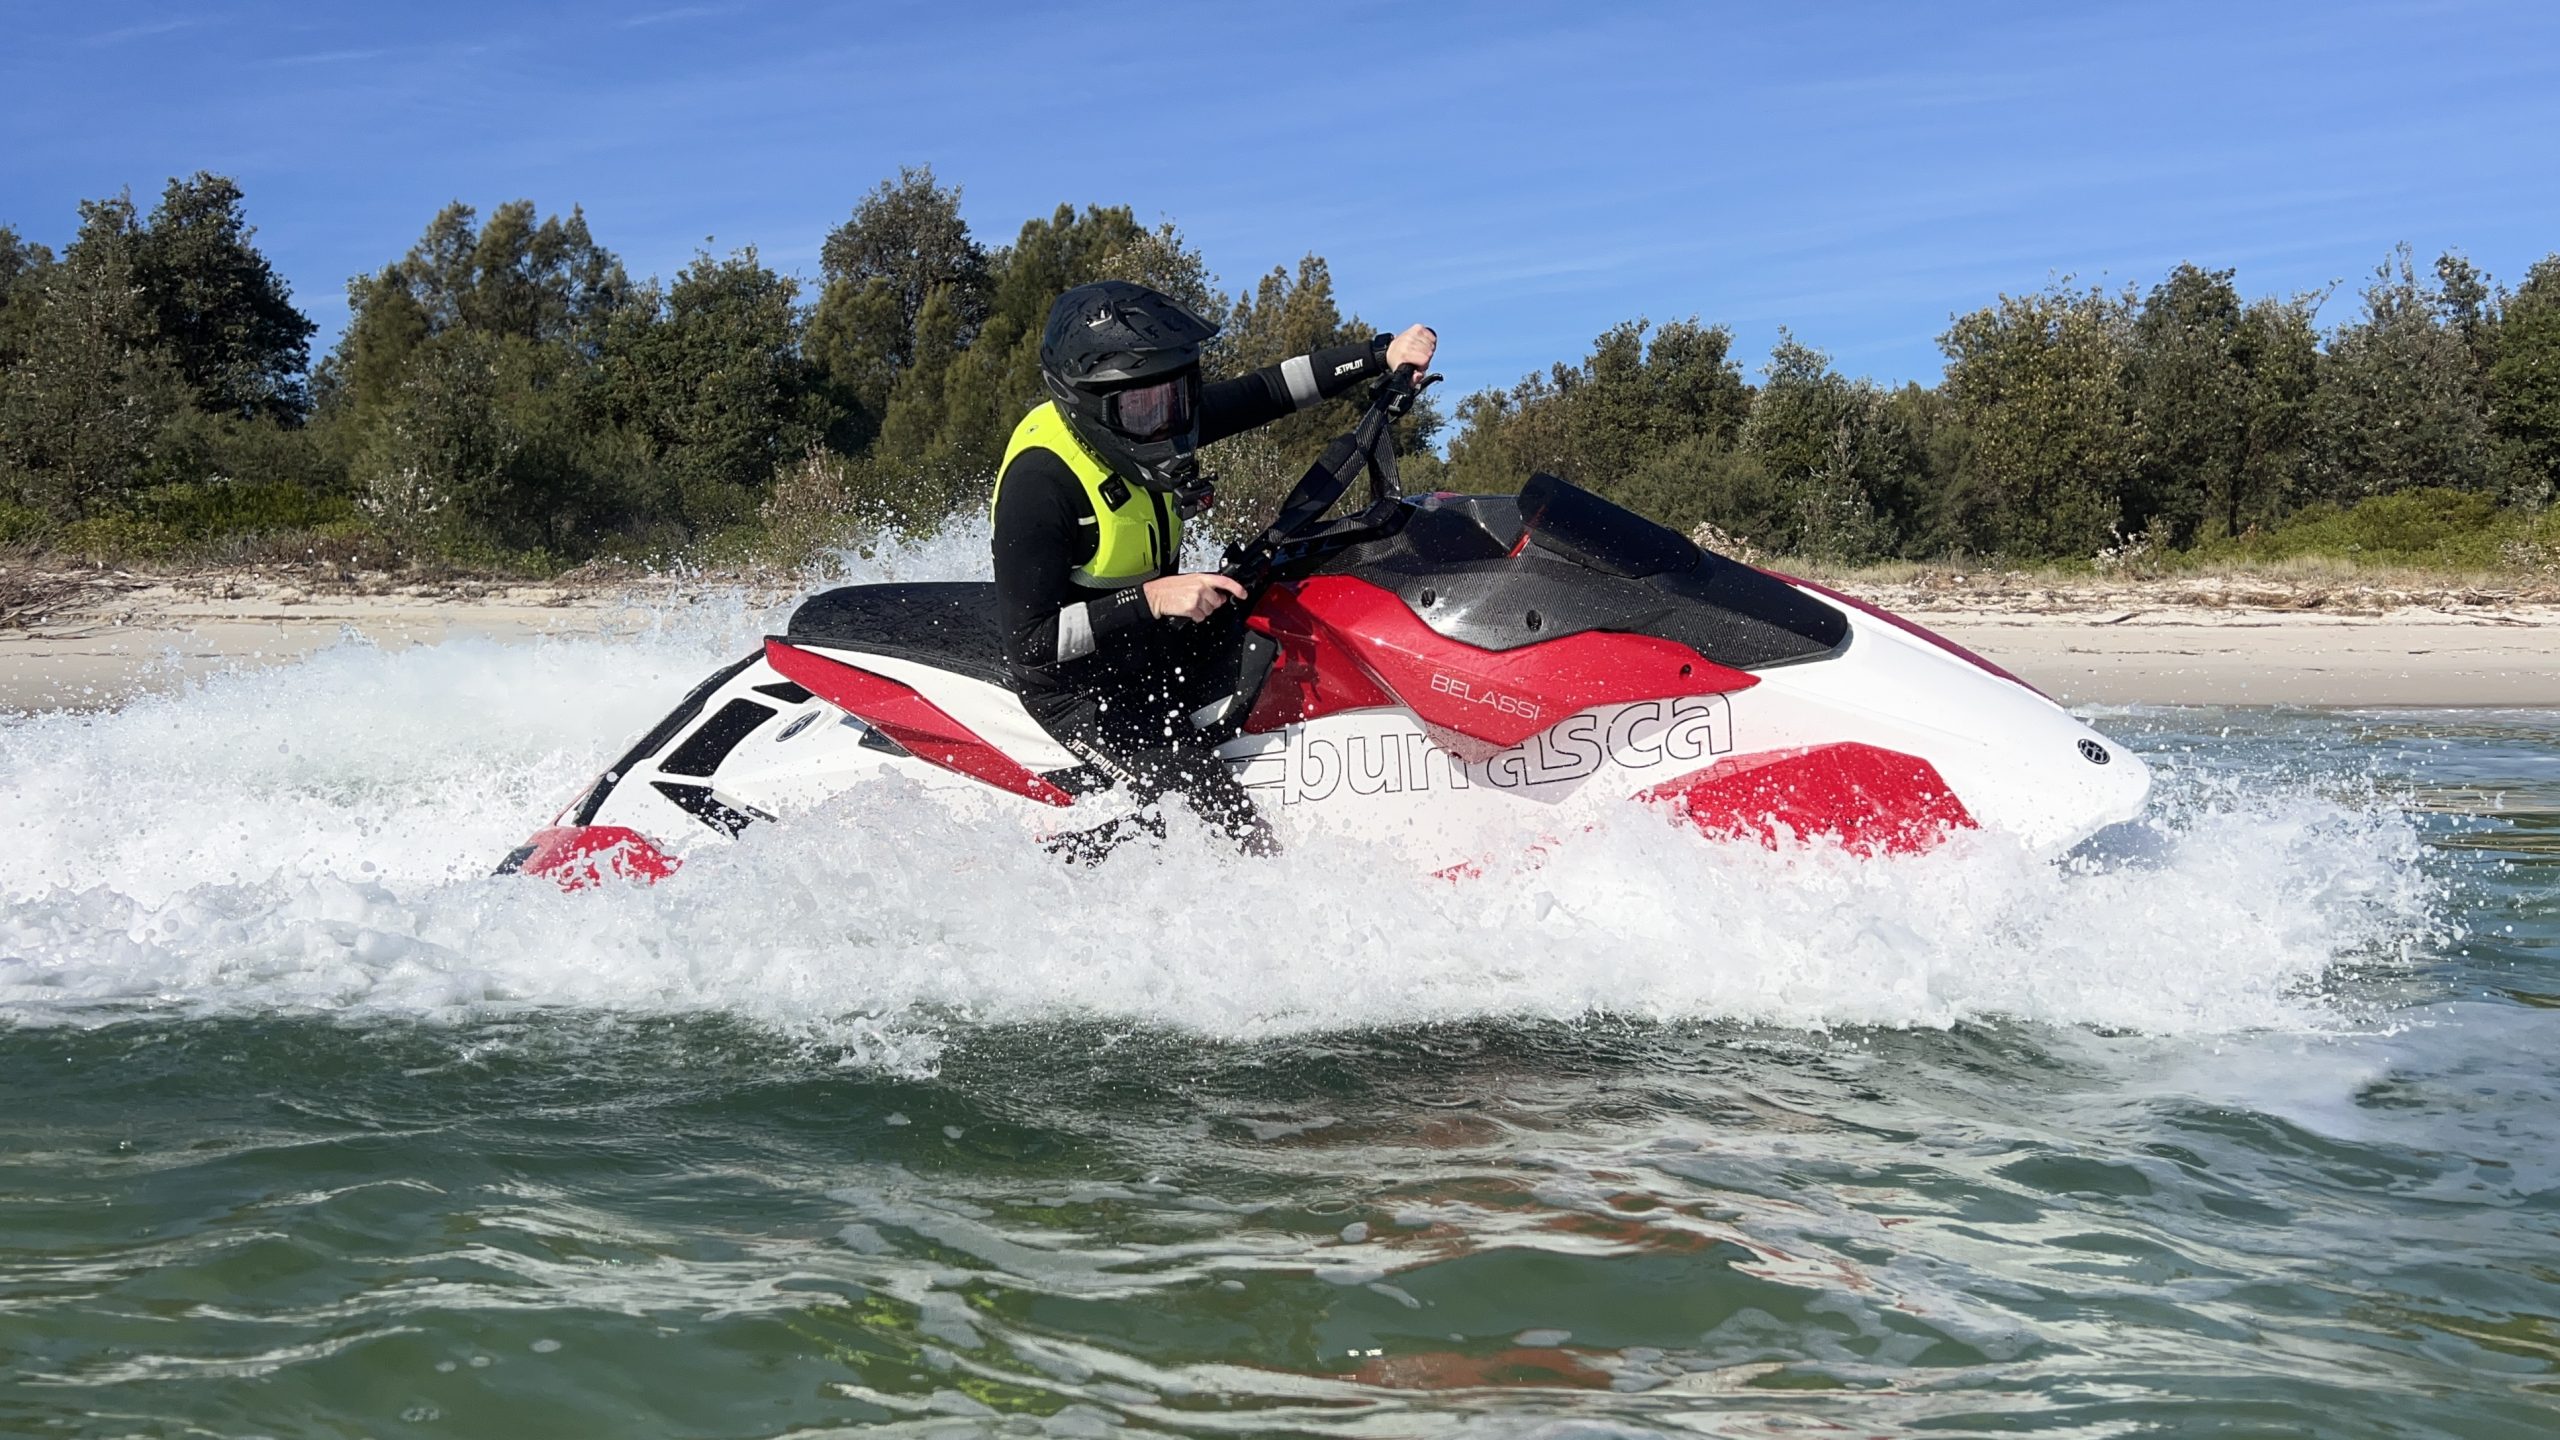 2023 Sea-Doo Switch Cruise review, price and specs in Australia 